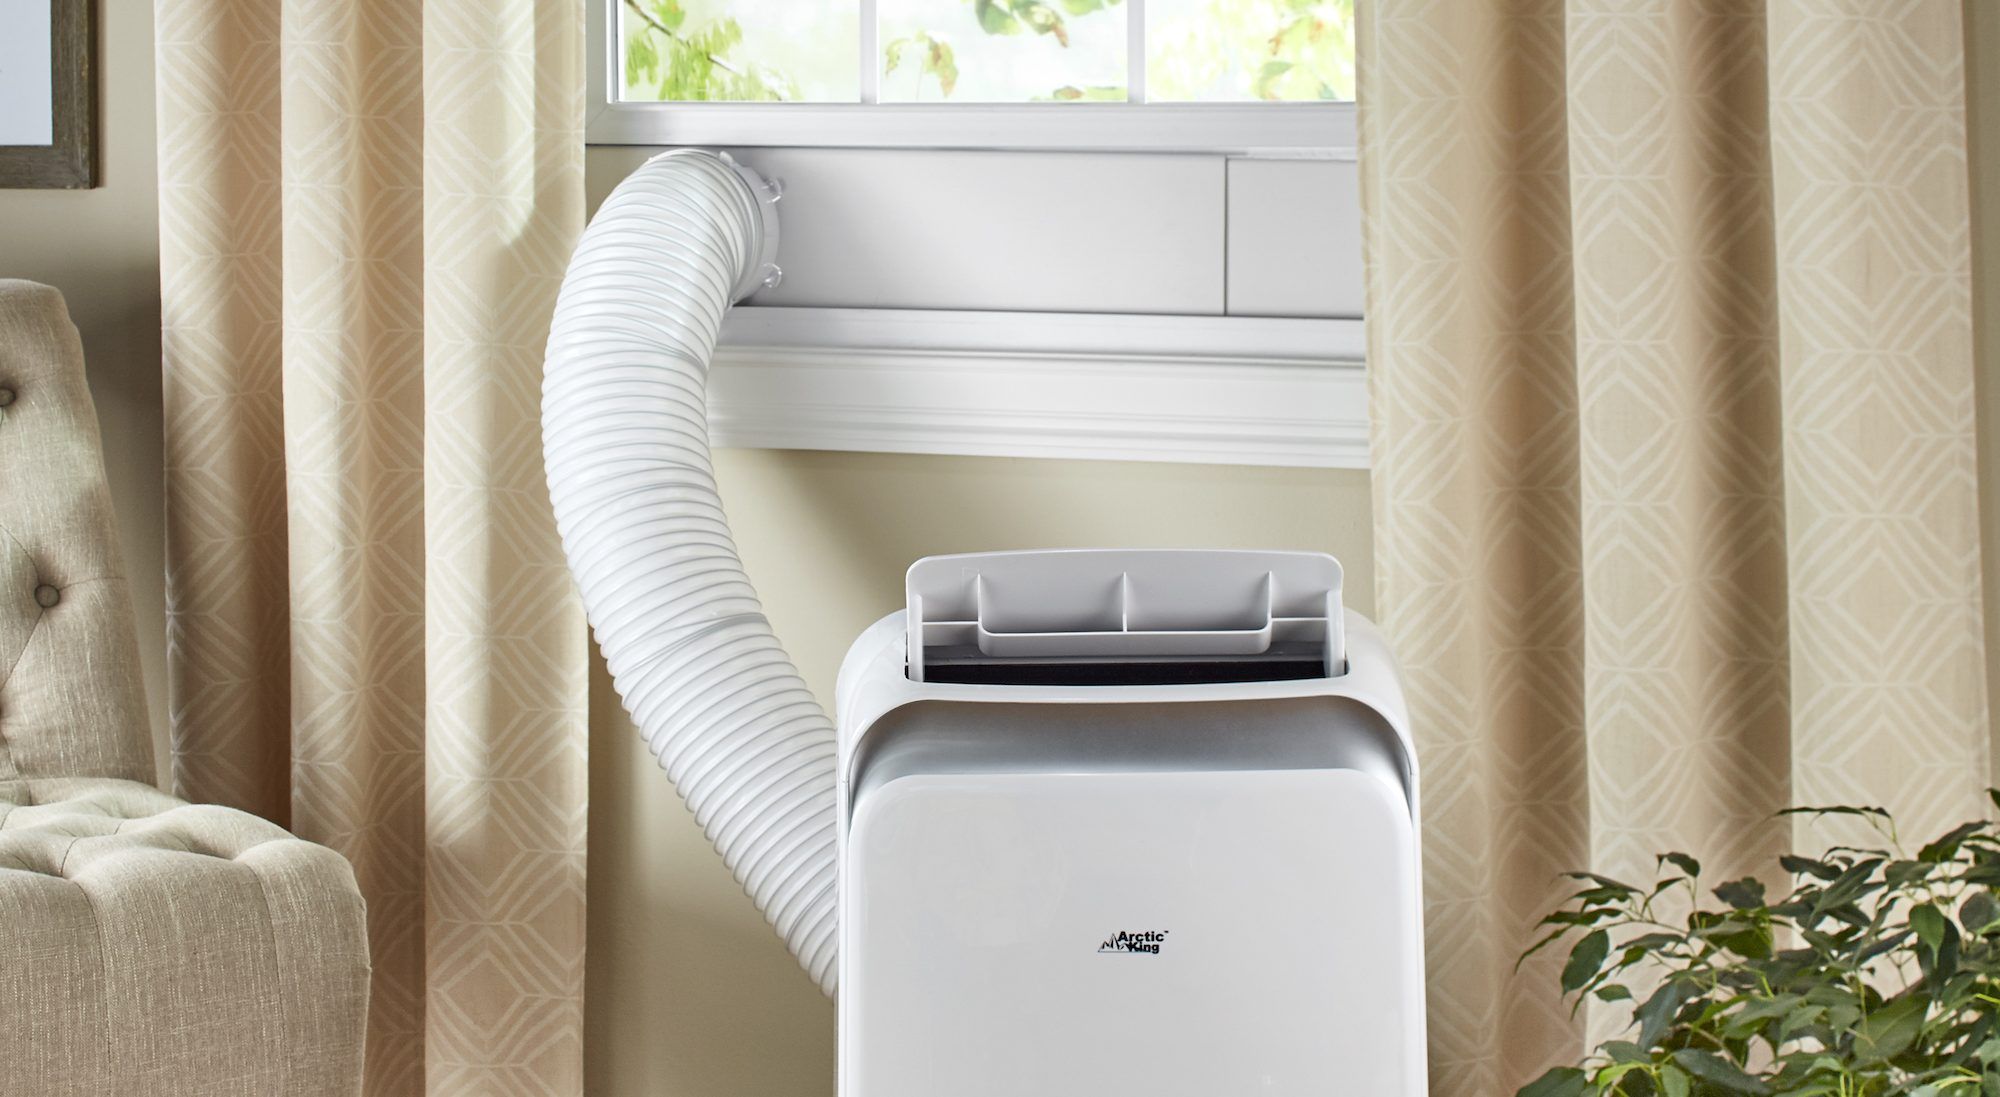 These tips will help you set up your portable A/C ReviewThis